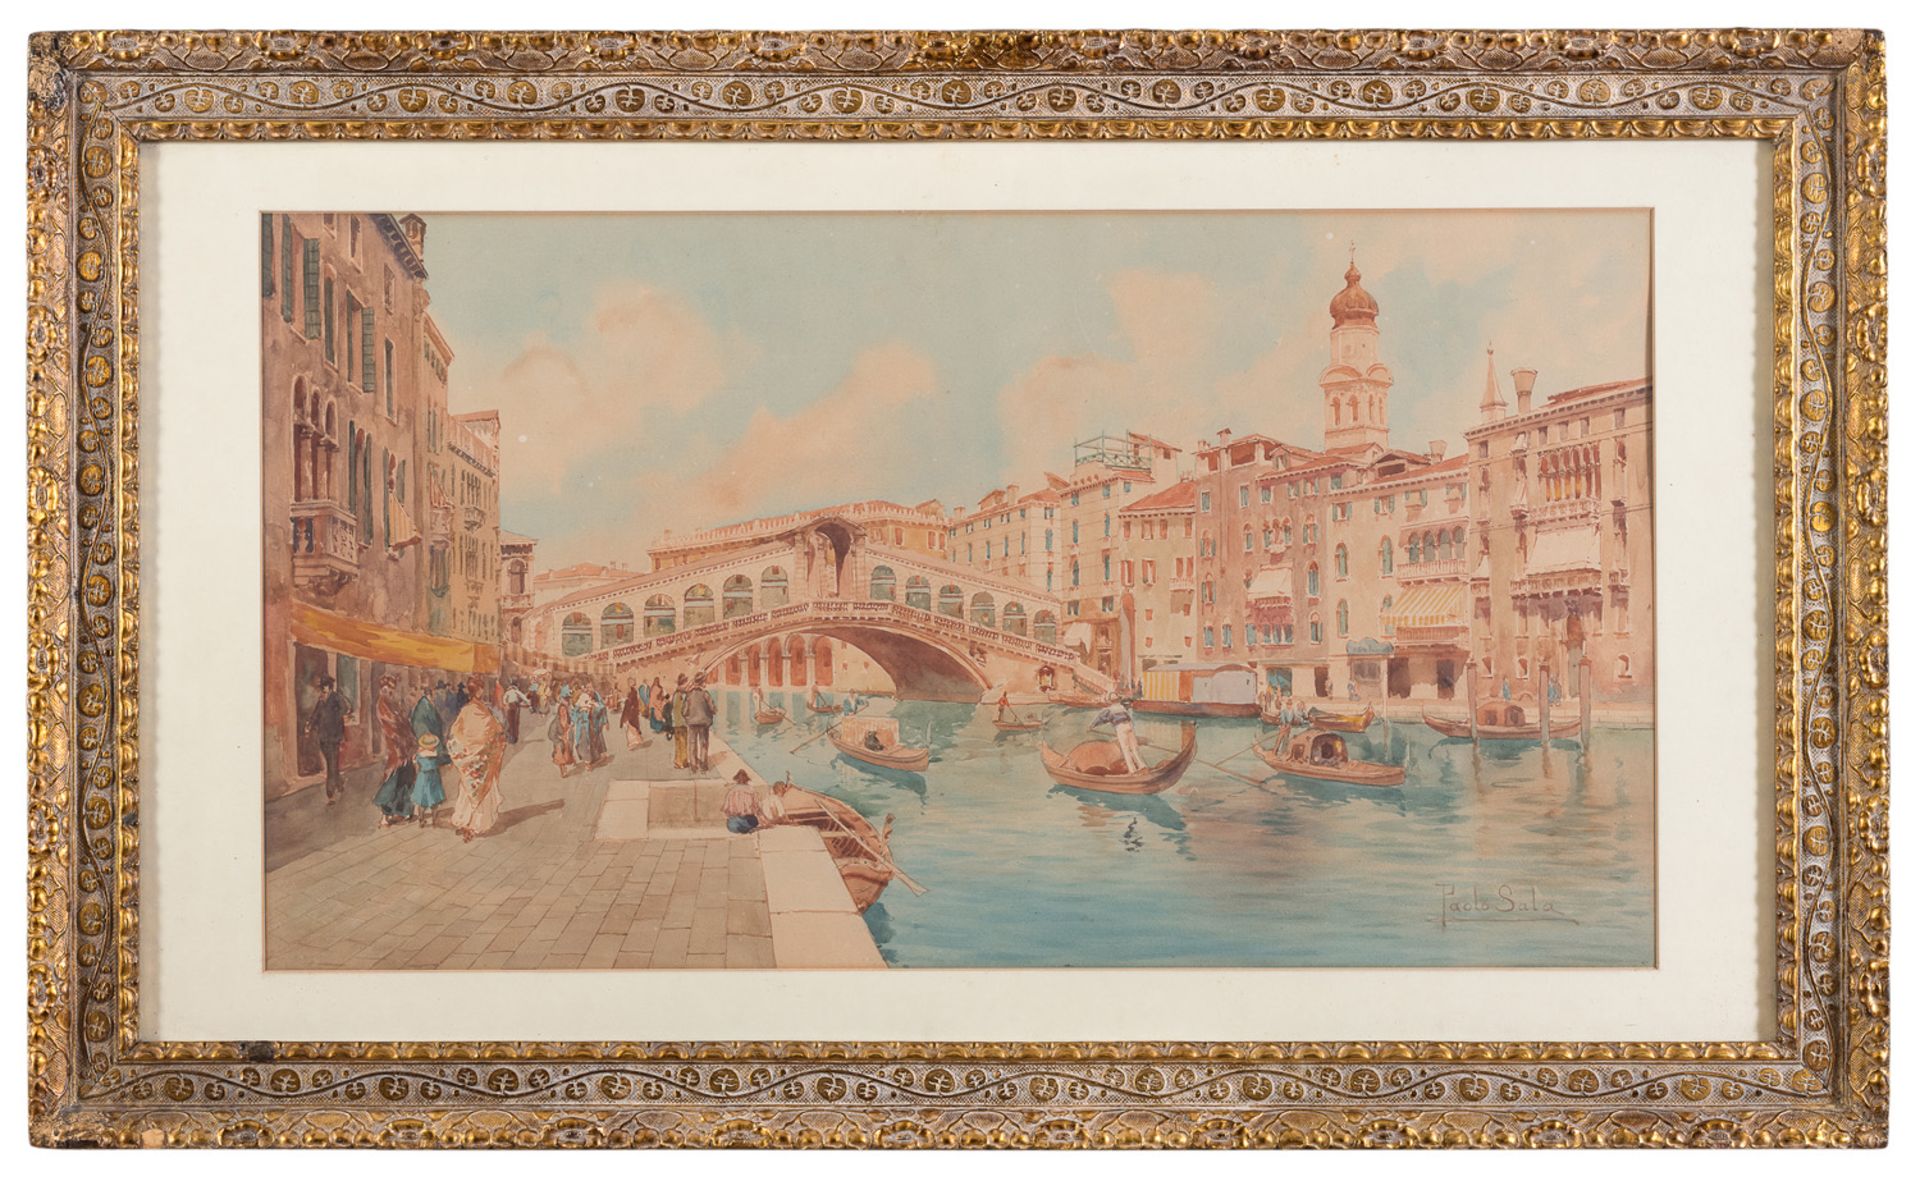 WATERCOLOR BY PAOLO SALA (1859-1924)